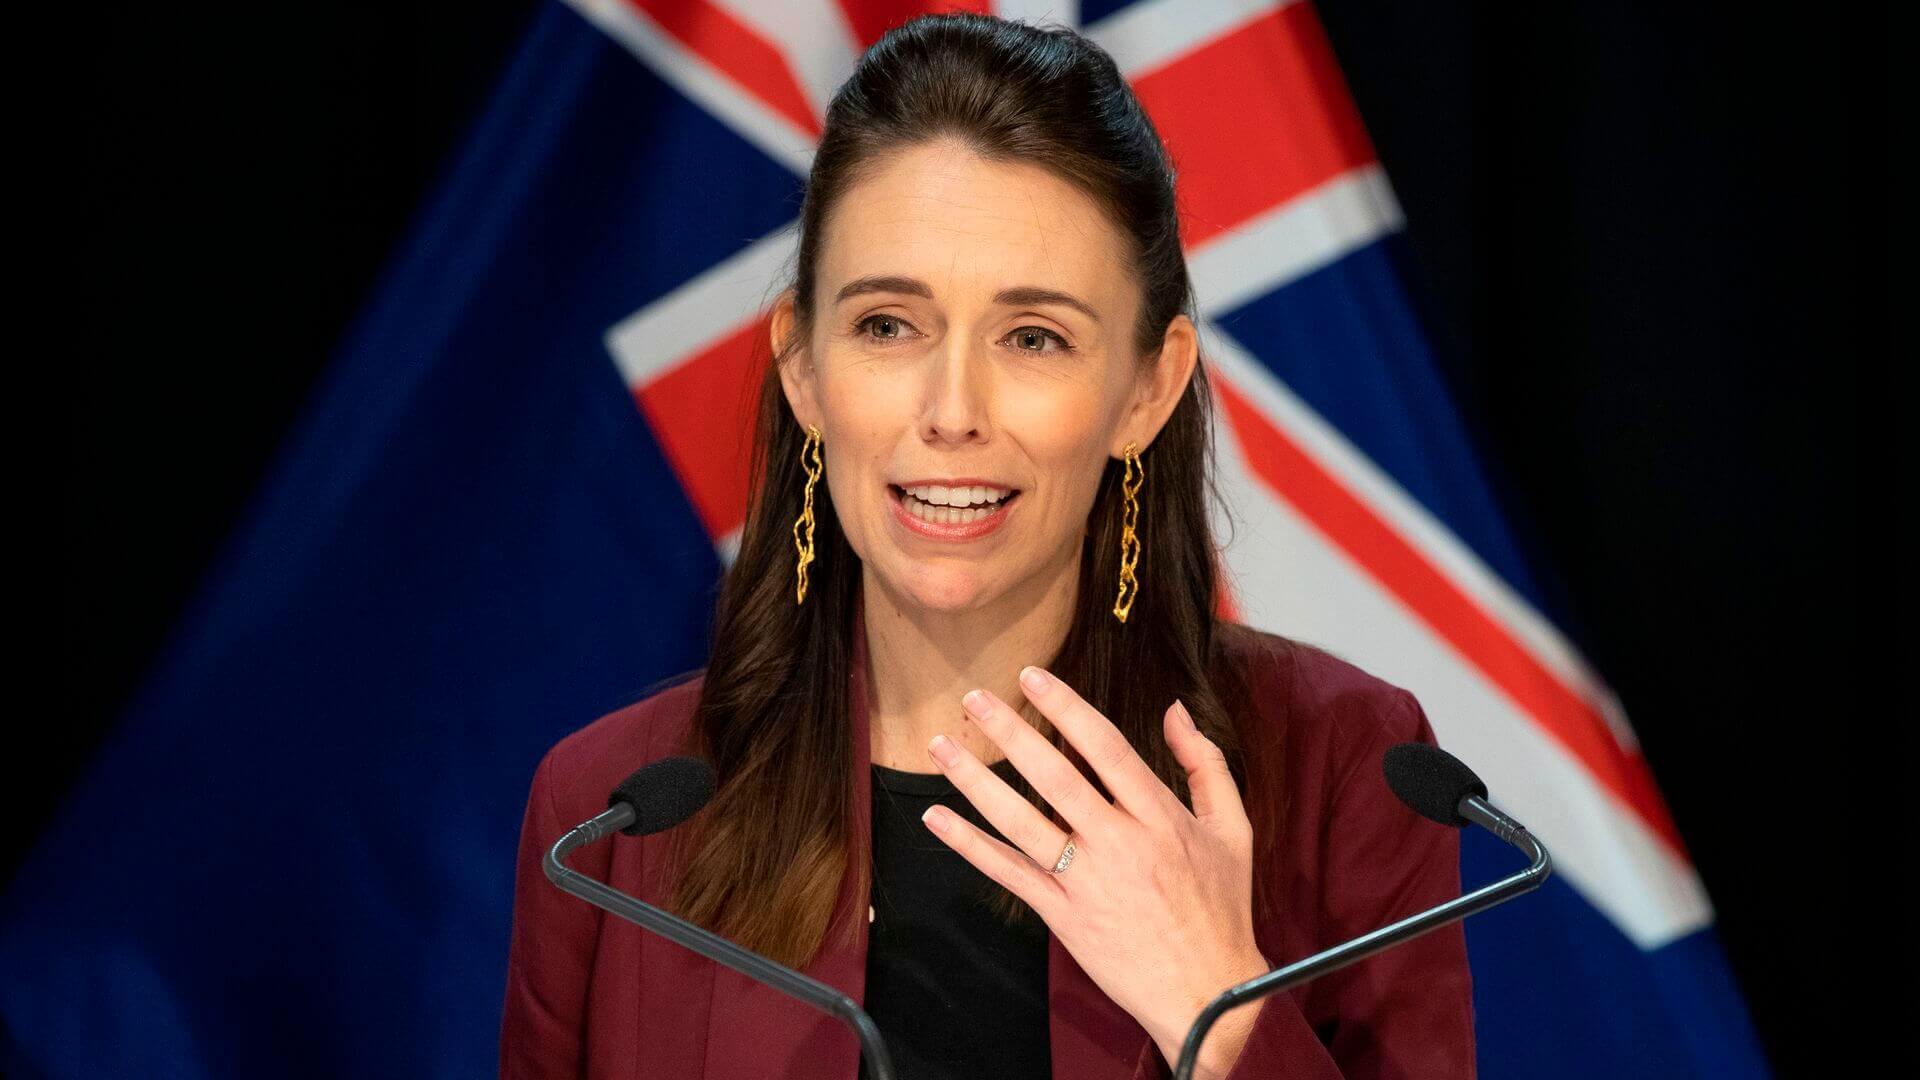 What Lessons Can Narendra Modi Learn From Jacinda Ardern’s COVID-19 Response?